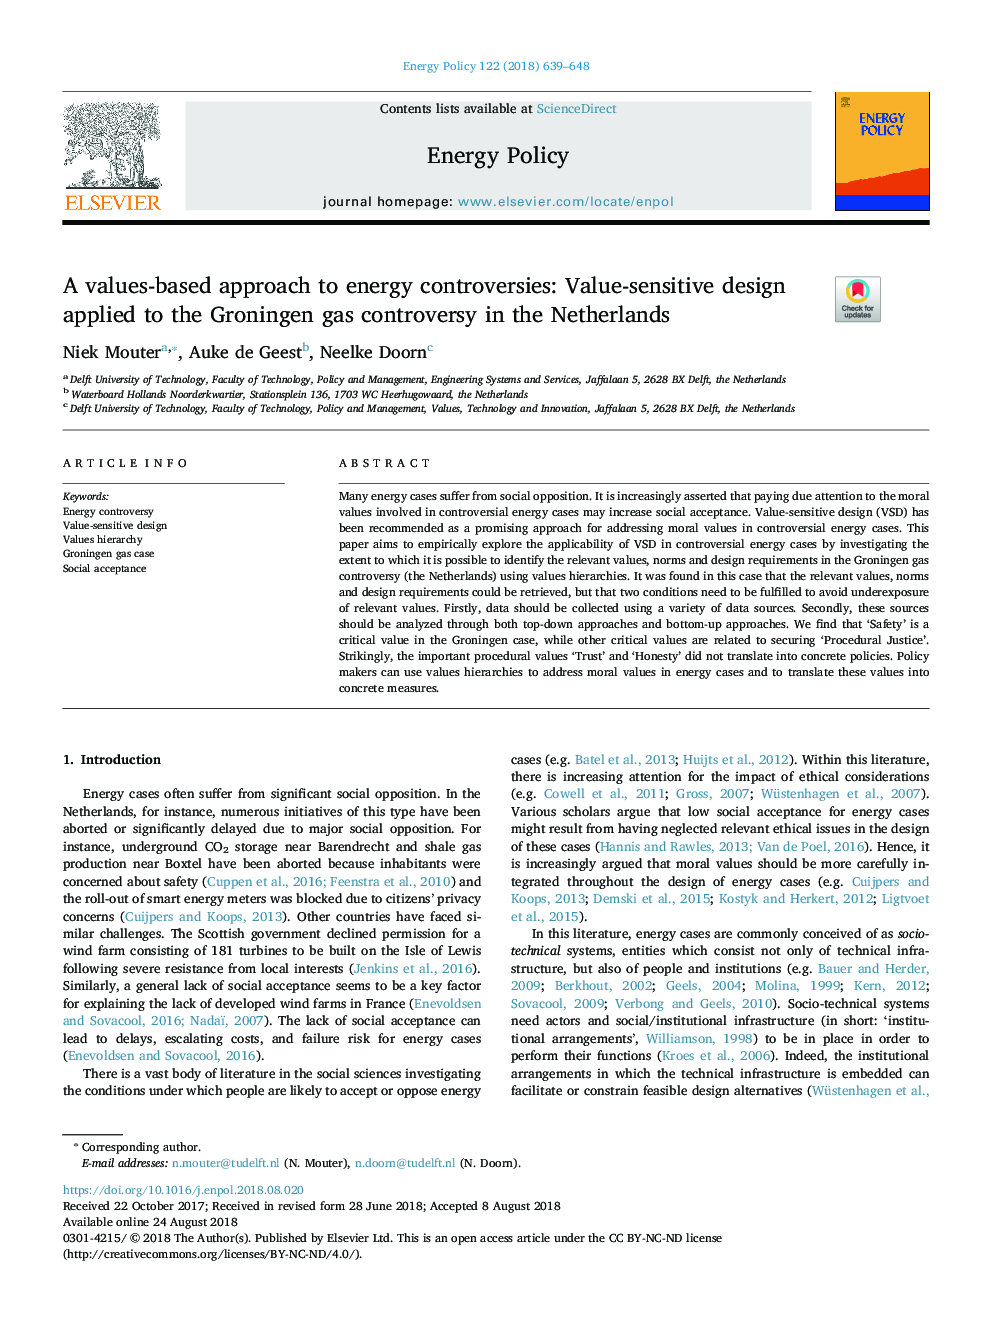 A values-based approach to energy controversies: Value-sensitive design applied to the Groningen gas controversy in the Netherlands